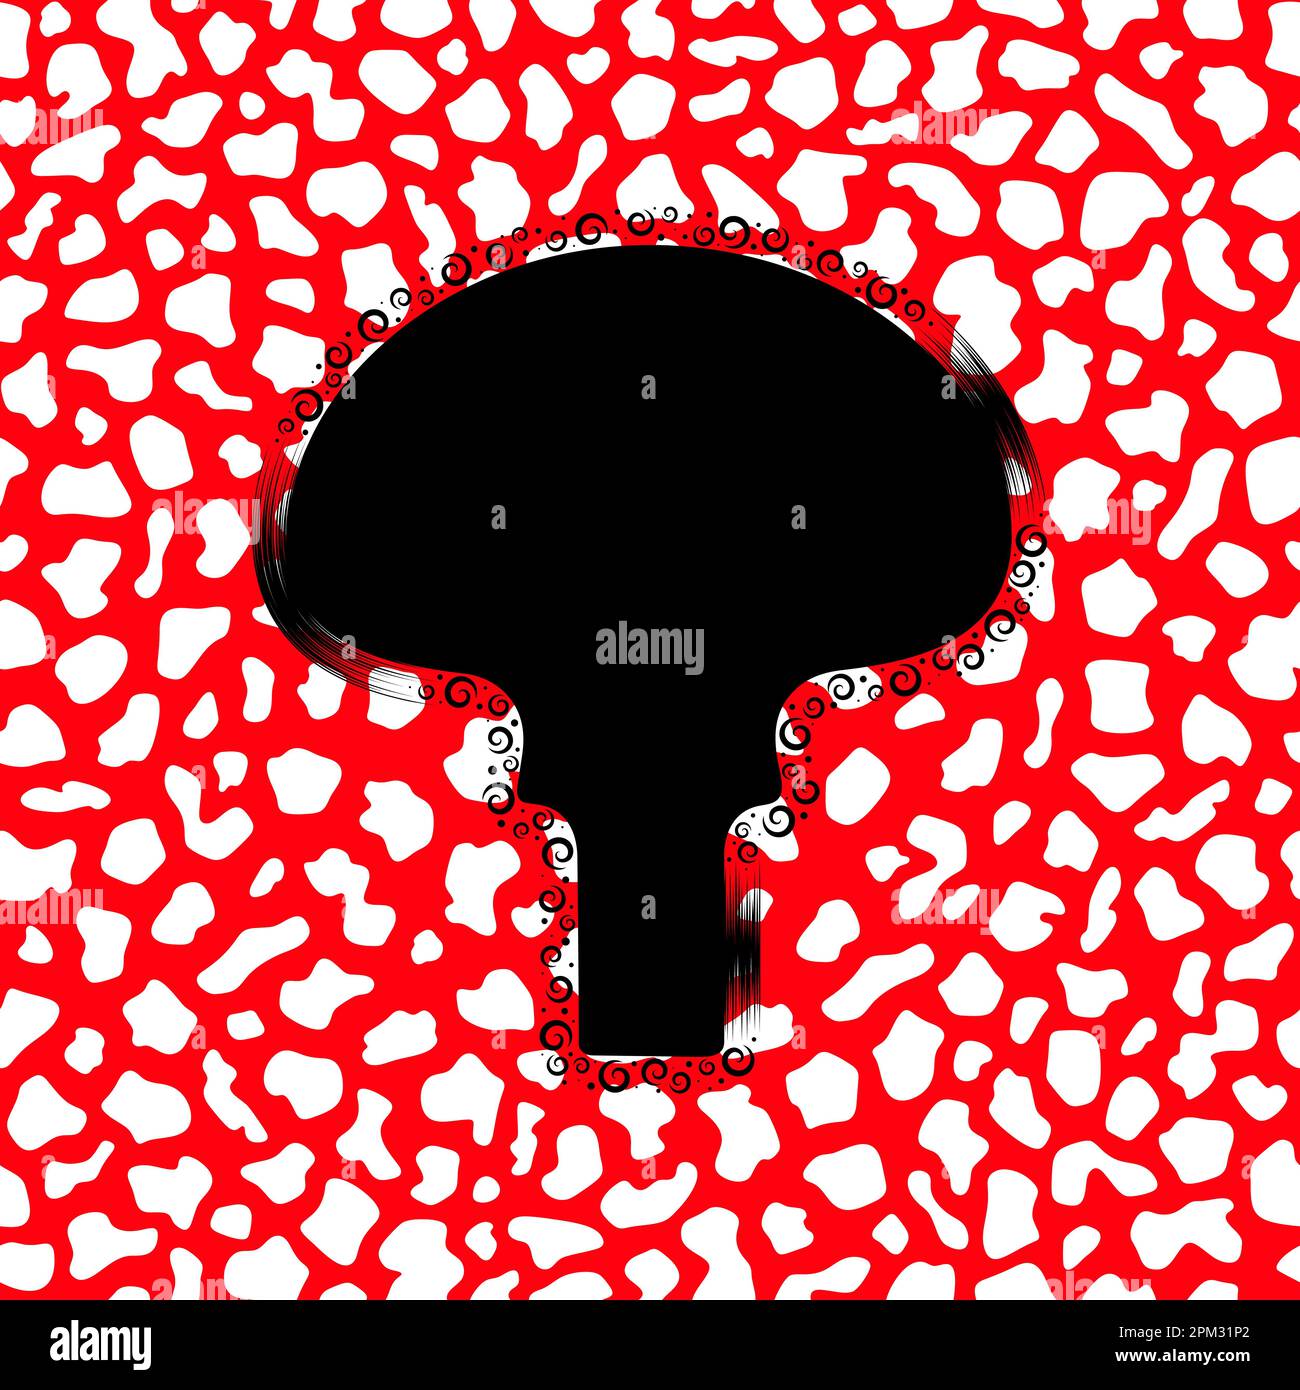 Illustration of fly agaric mushroom silhouette with red and white texture. Vector colored background. Stock Vector